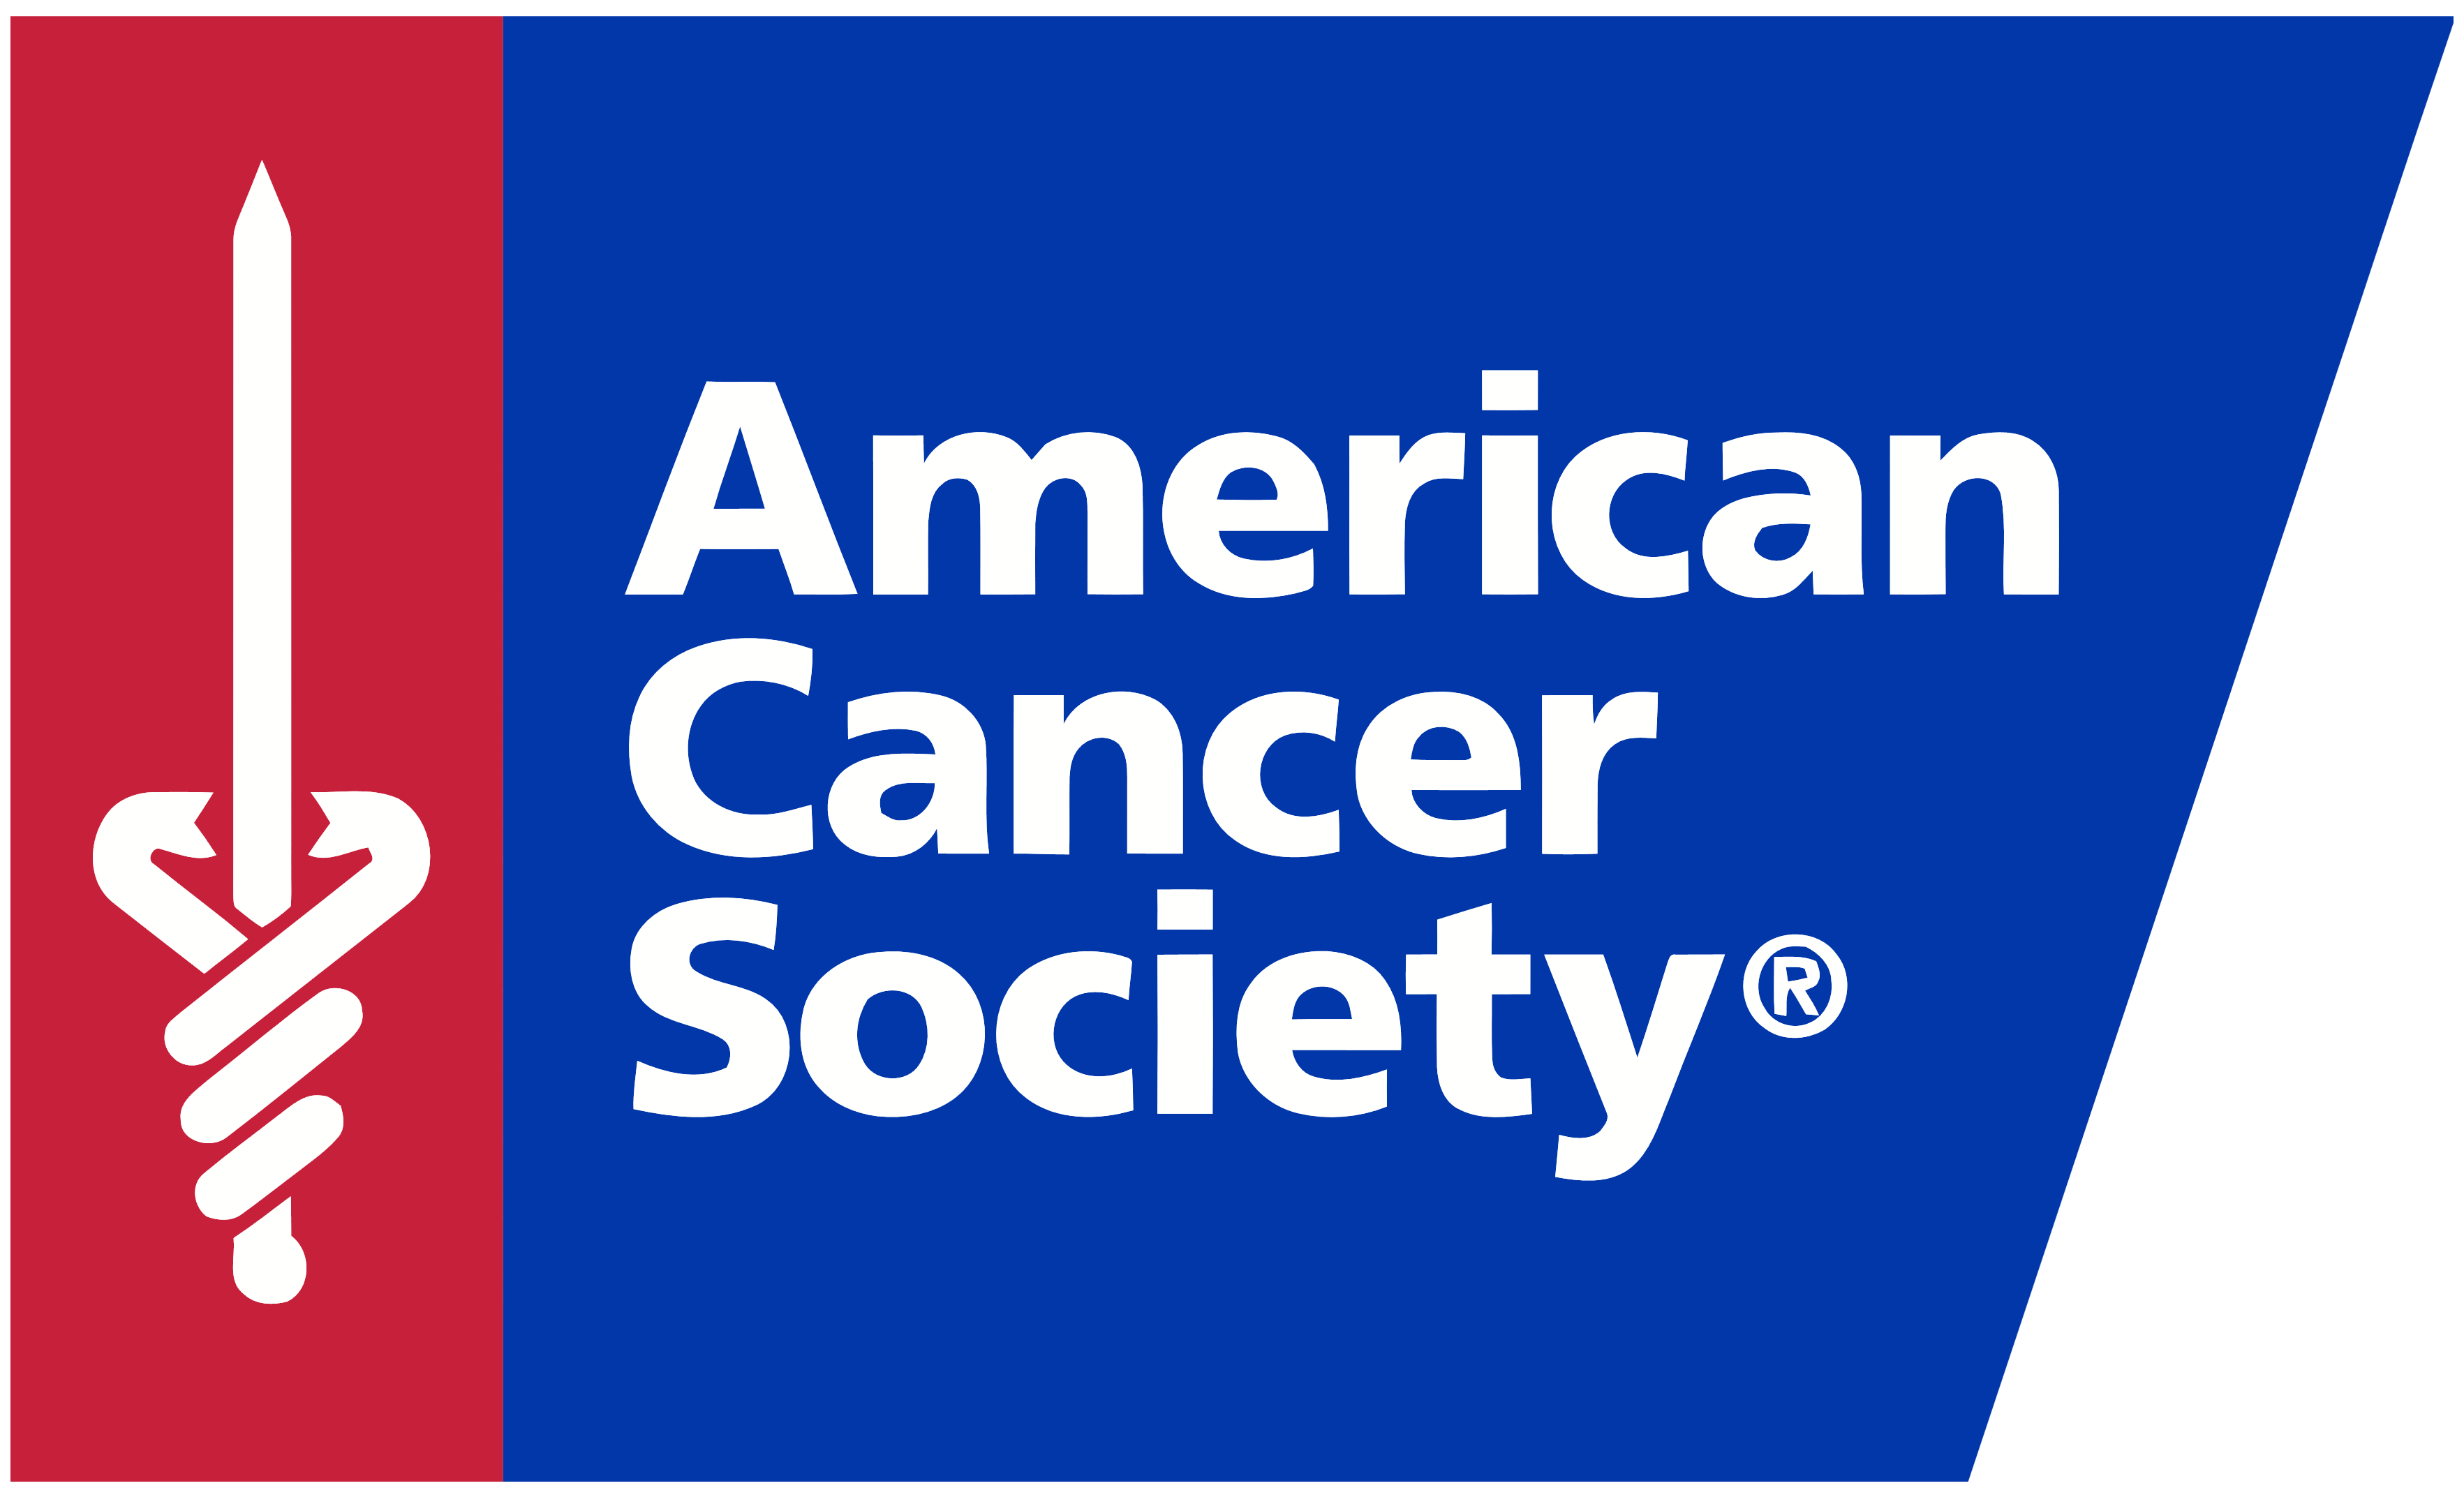 4th Street Auto supports the American Cancer Society